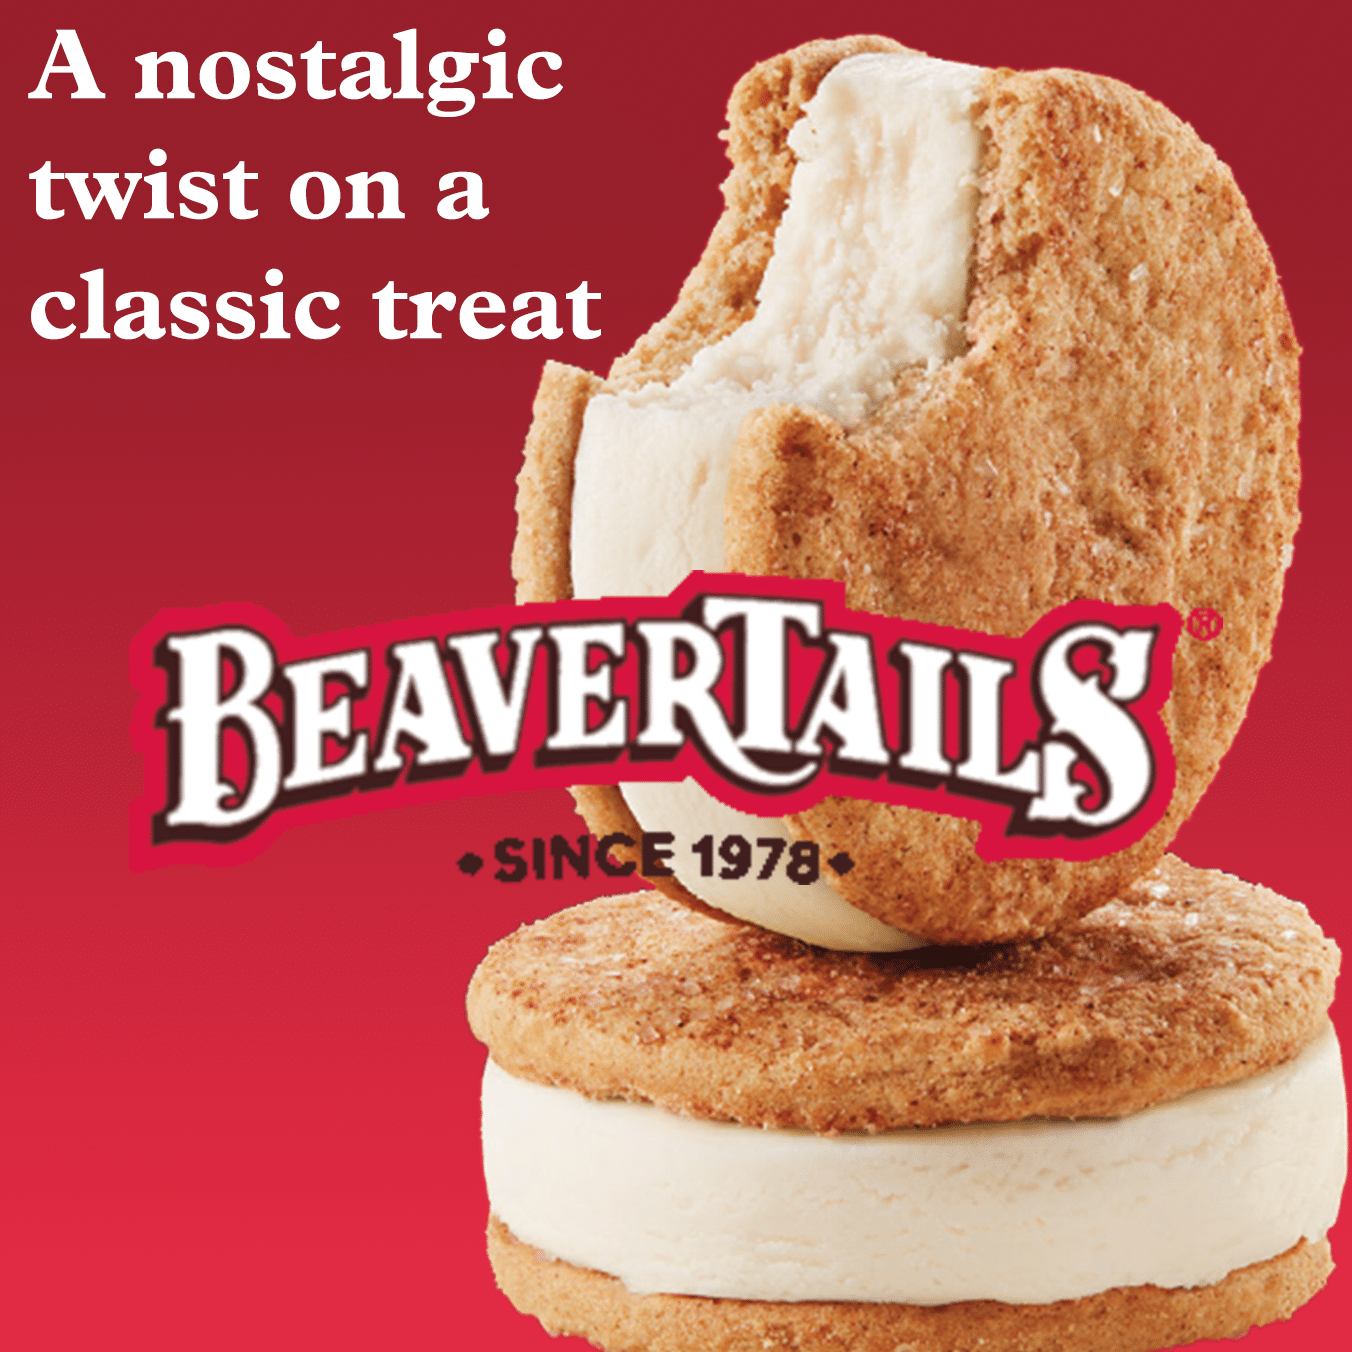 beavertails ice cream sandwiches from transcold distribution wholesale distributor